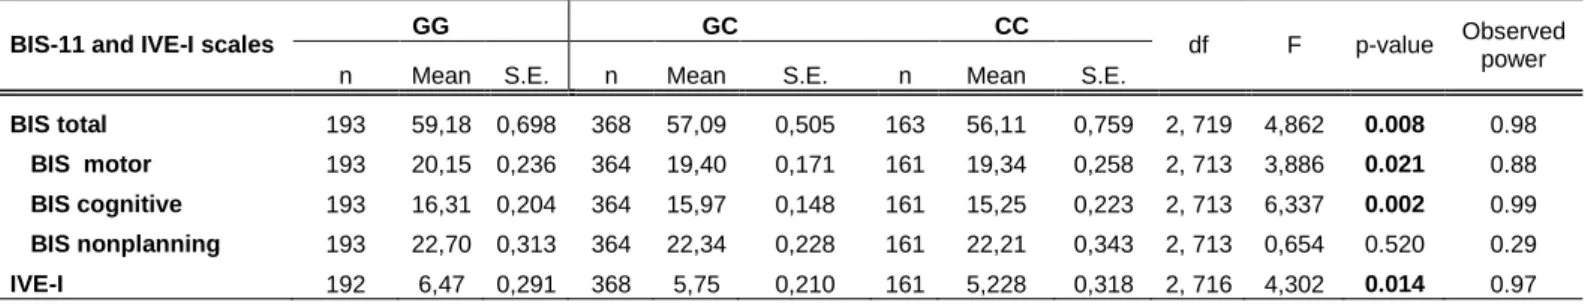 Table  3.  Analysis  of  variance  table  for  the  Barratt  Impulsiveness  Scale  (BIS-11)  and  the  Impulsiveness  Subscale  (IVE-I)  of  the  Eysenck  Impulsiveness,  Venturesomeness and Empathy Scale associated with genotypes GG, GC and CC 